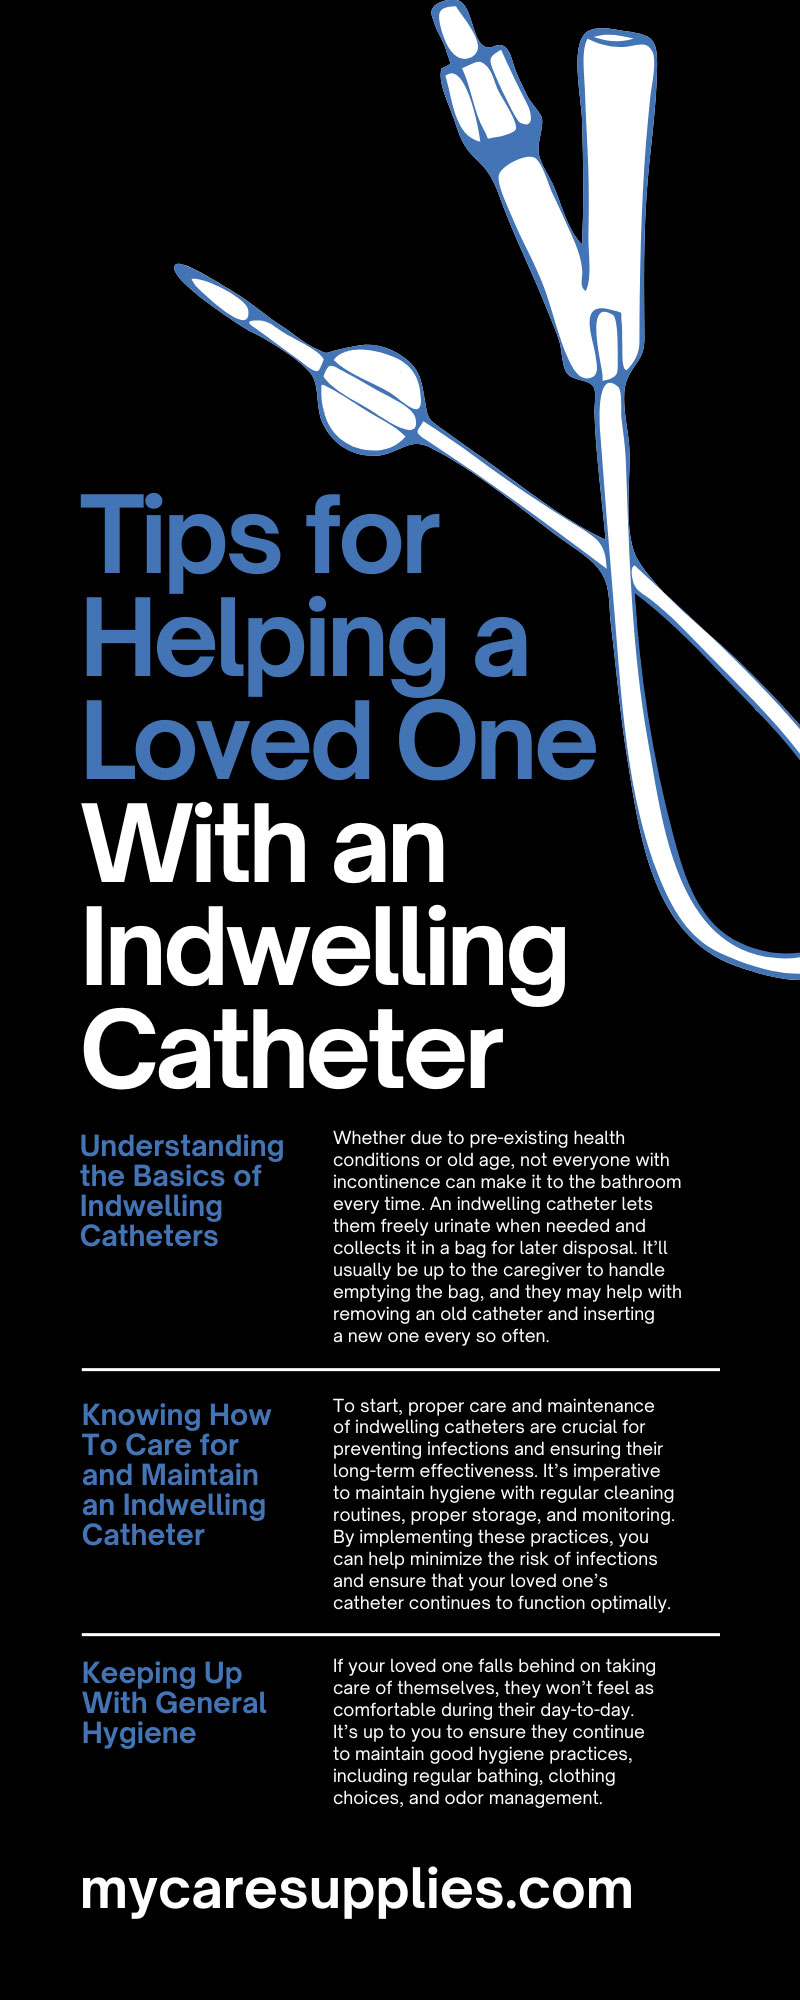 8 Tips for Helping a Loved One With an Indwelling Catheter